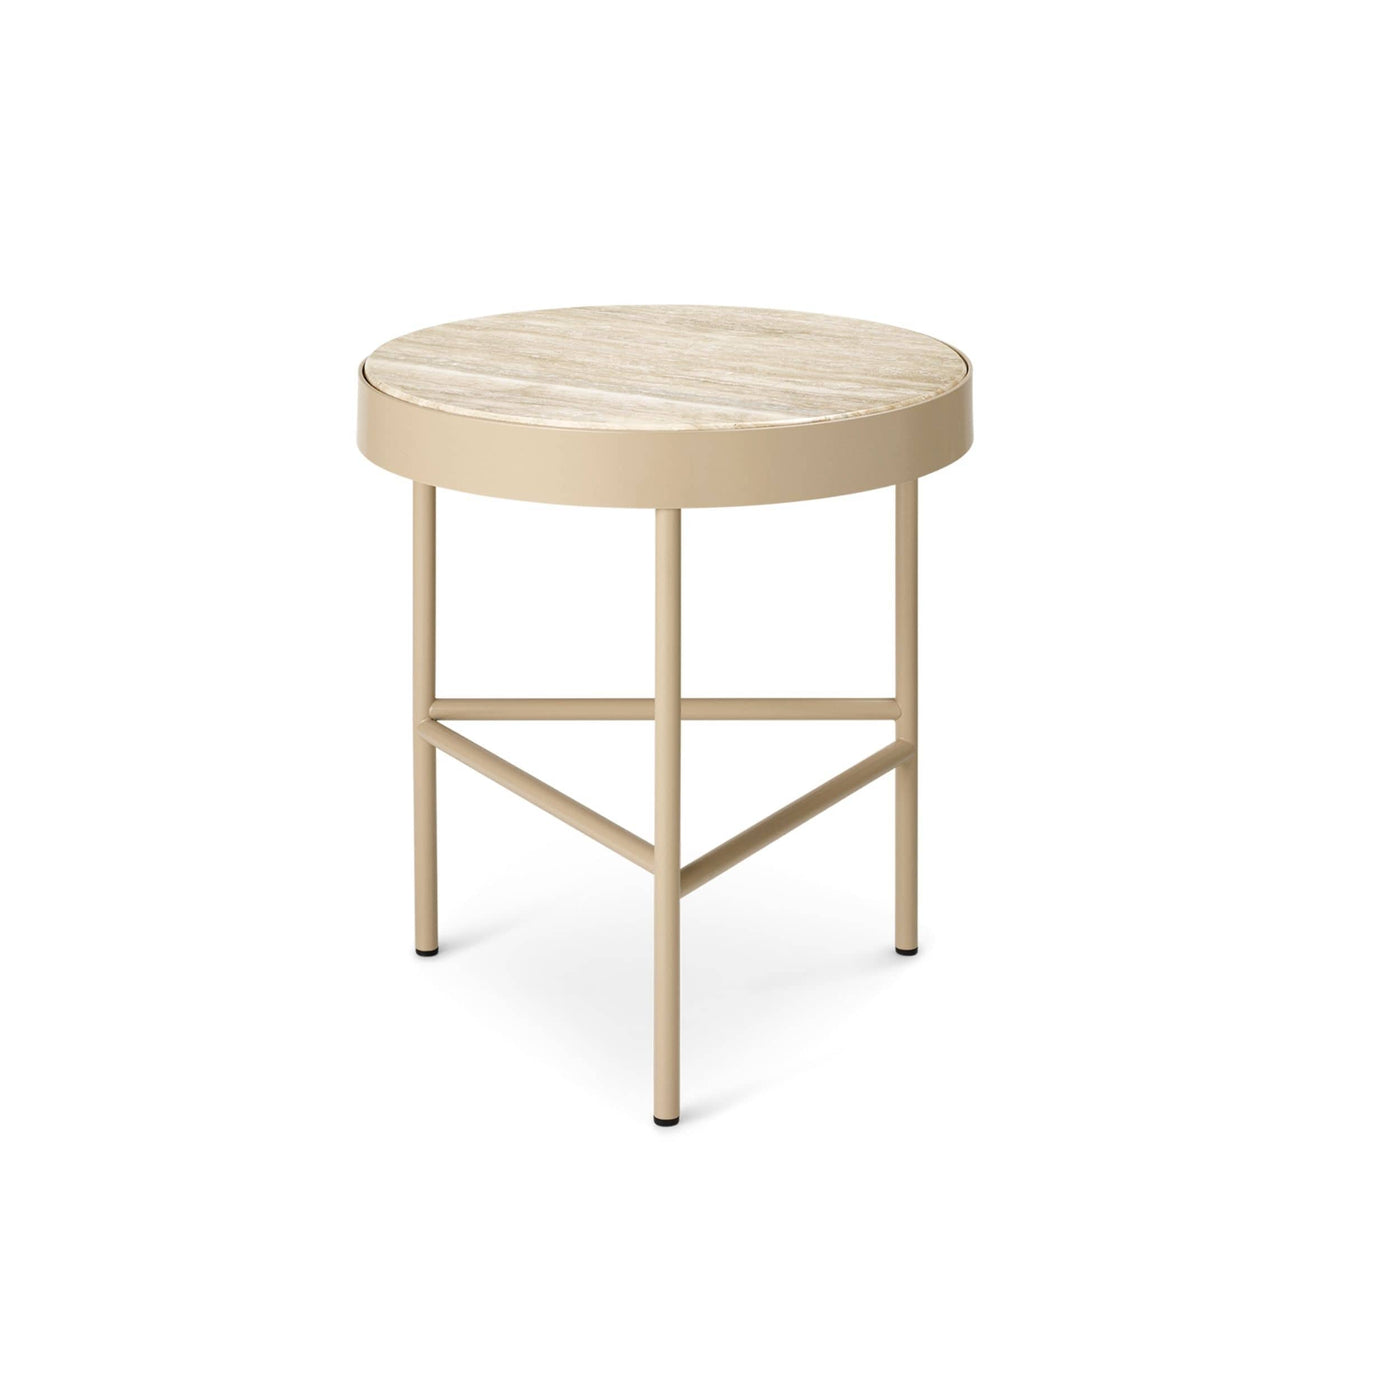 Ferm Living Travertine Table medium in cashmere, shop online at someday designs